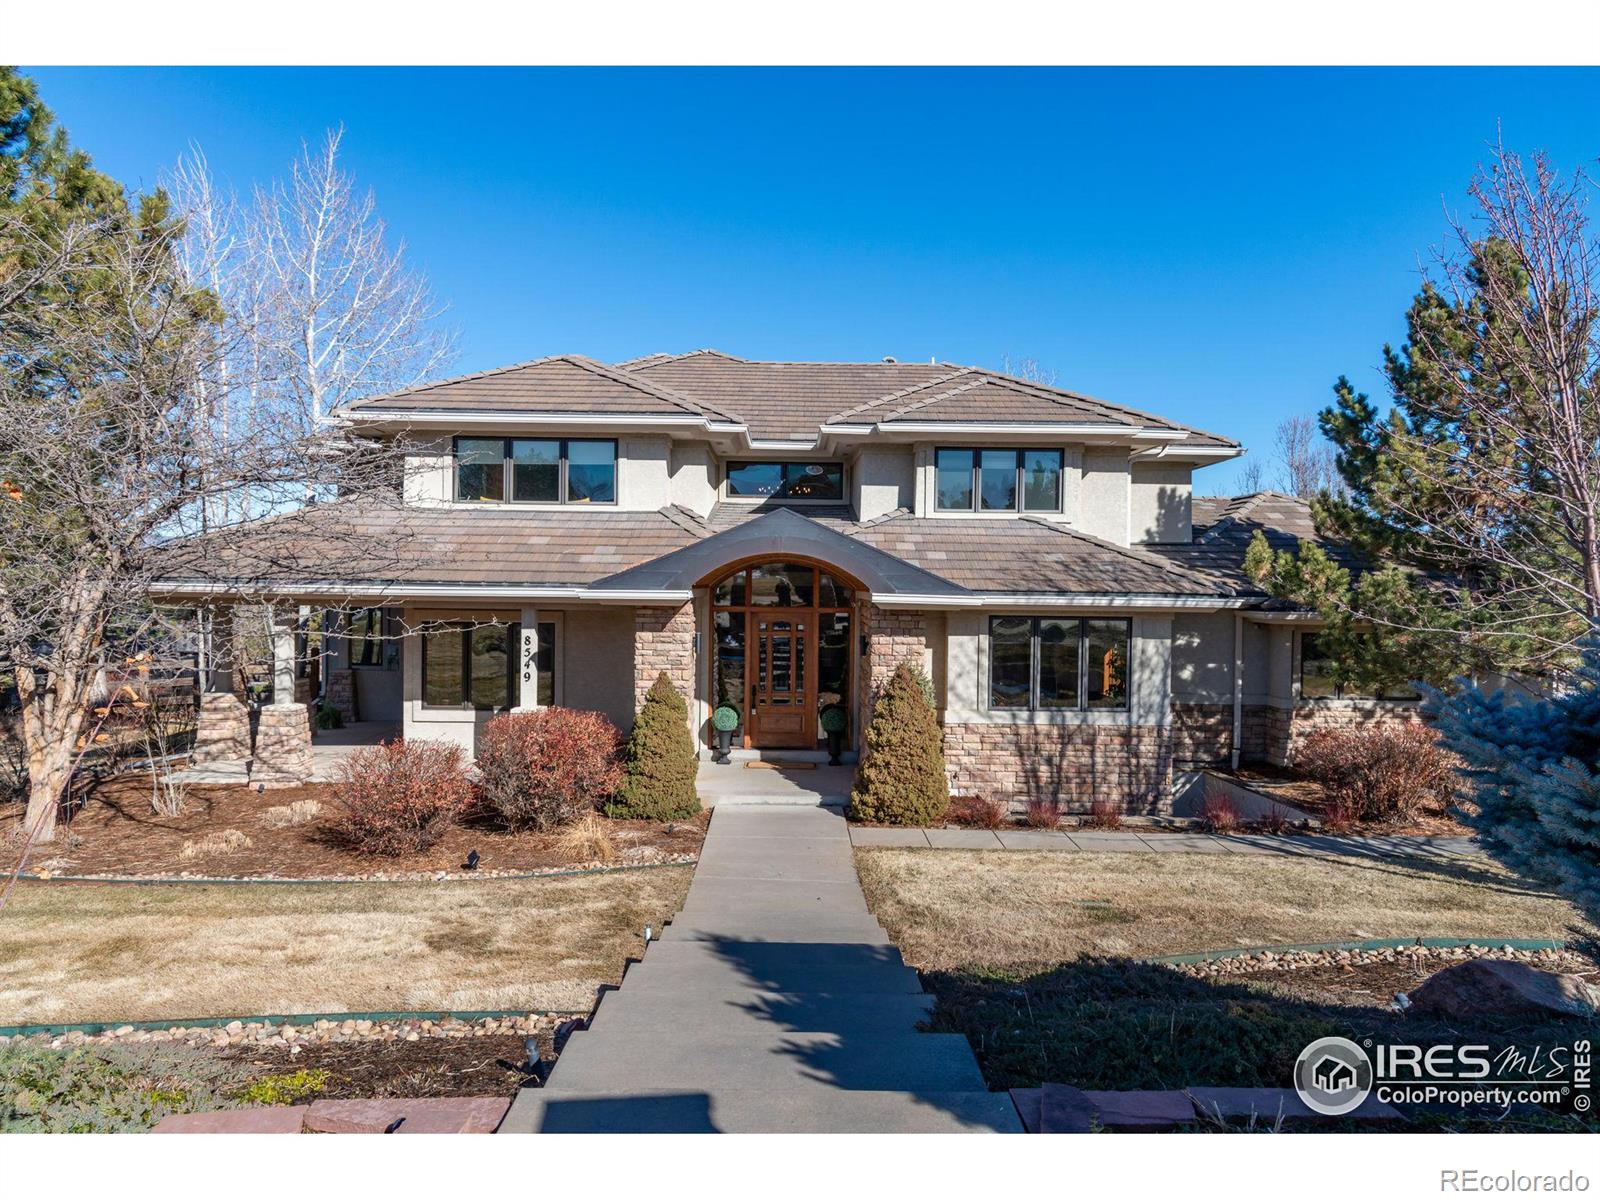 8549  monte vista avenue, Niwot sold home. Closed on 2024-04-16 for $2,700,000.